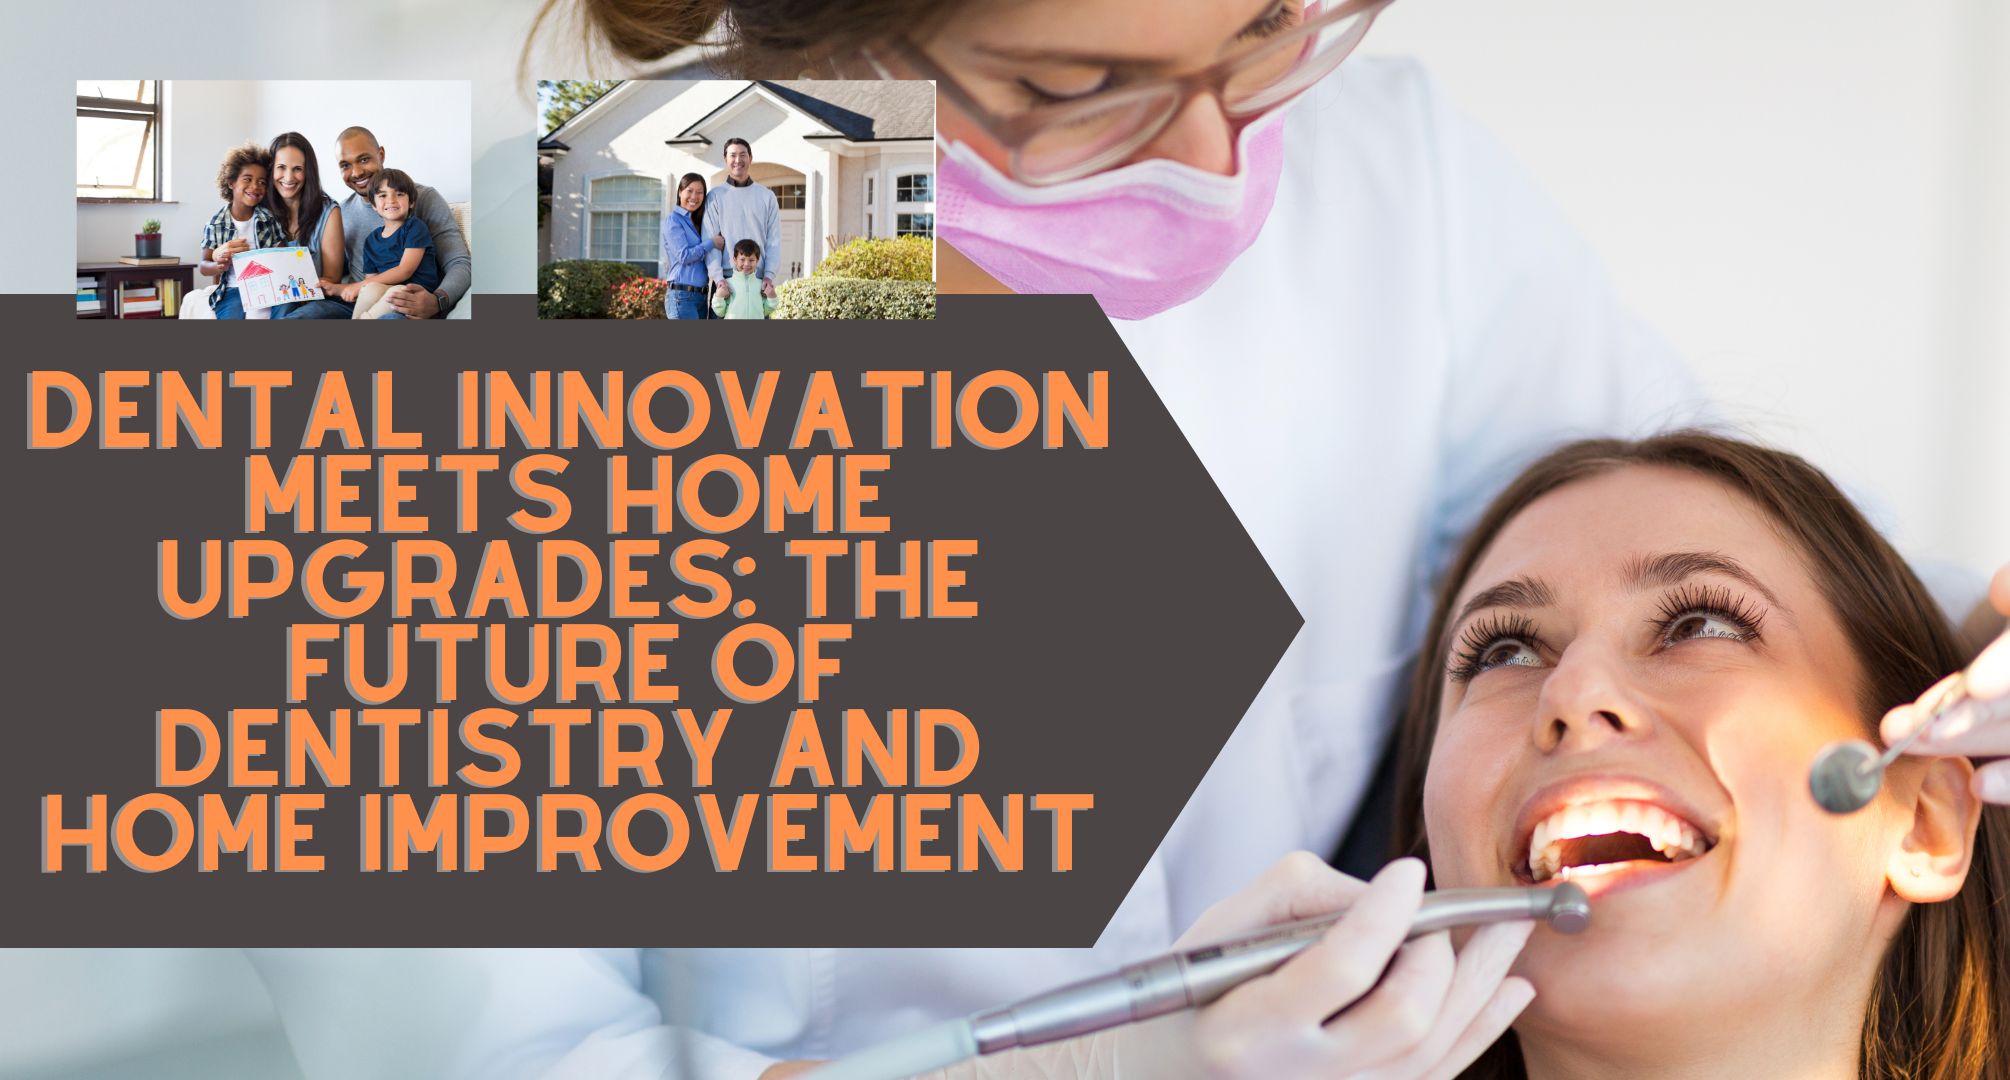 Dental Innovation Meets Home Upgrades The Future of Dentistry and Home Improvement